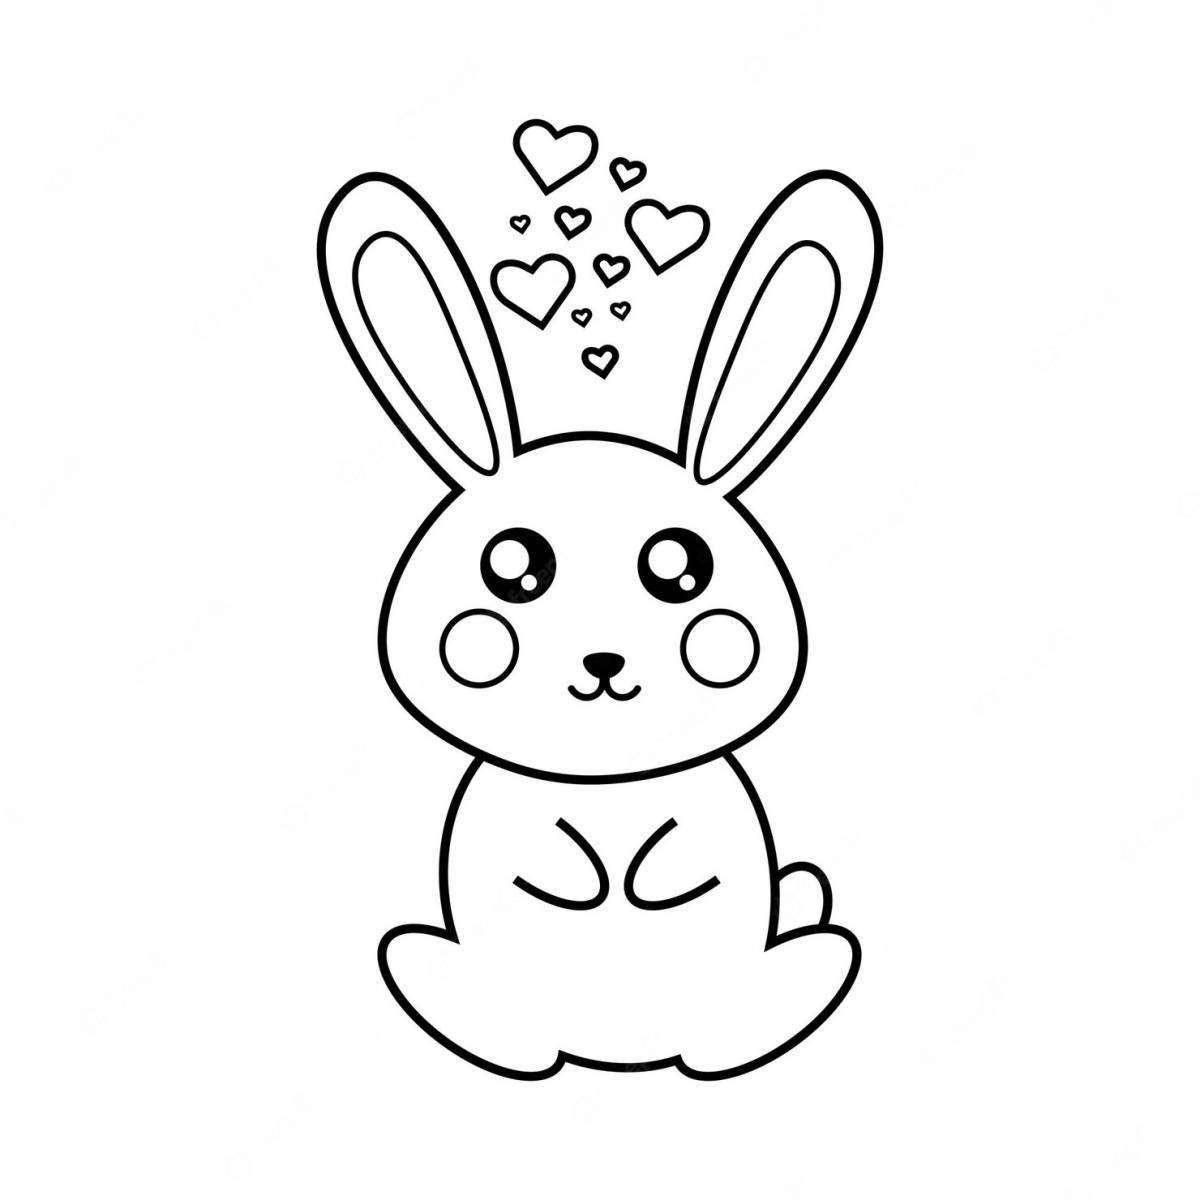 Soft bunny with heart coloring book